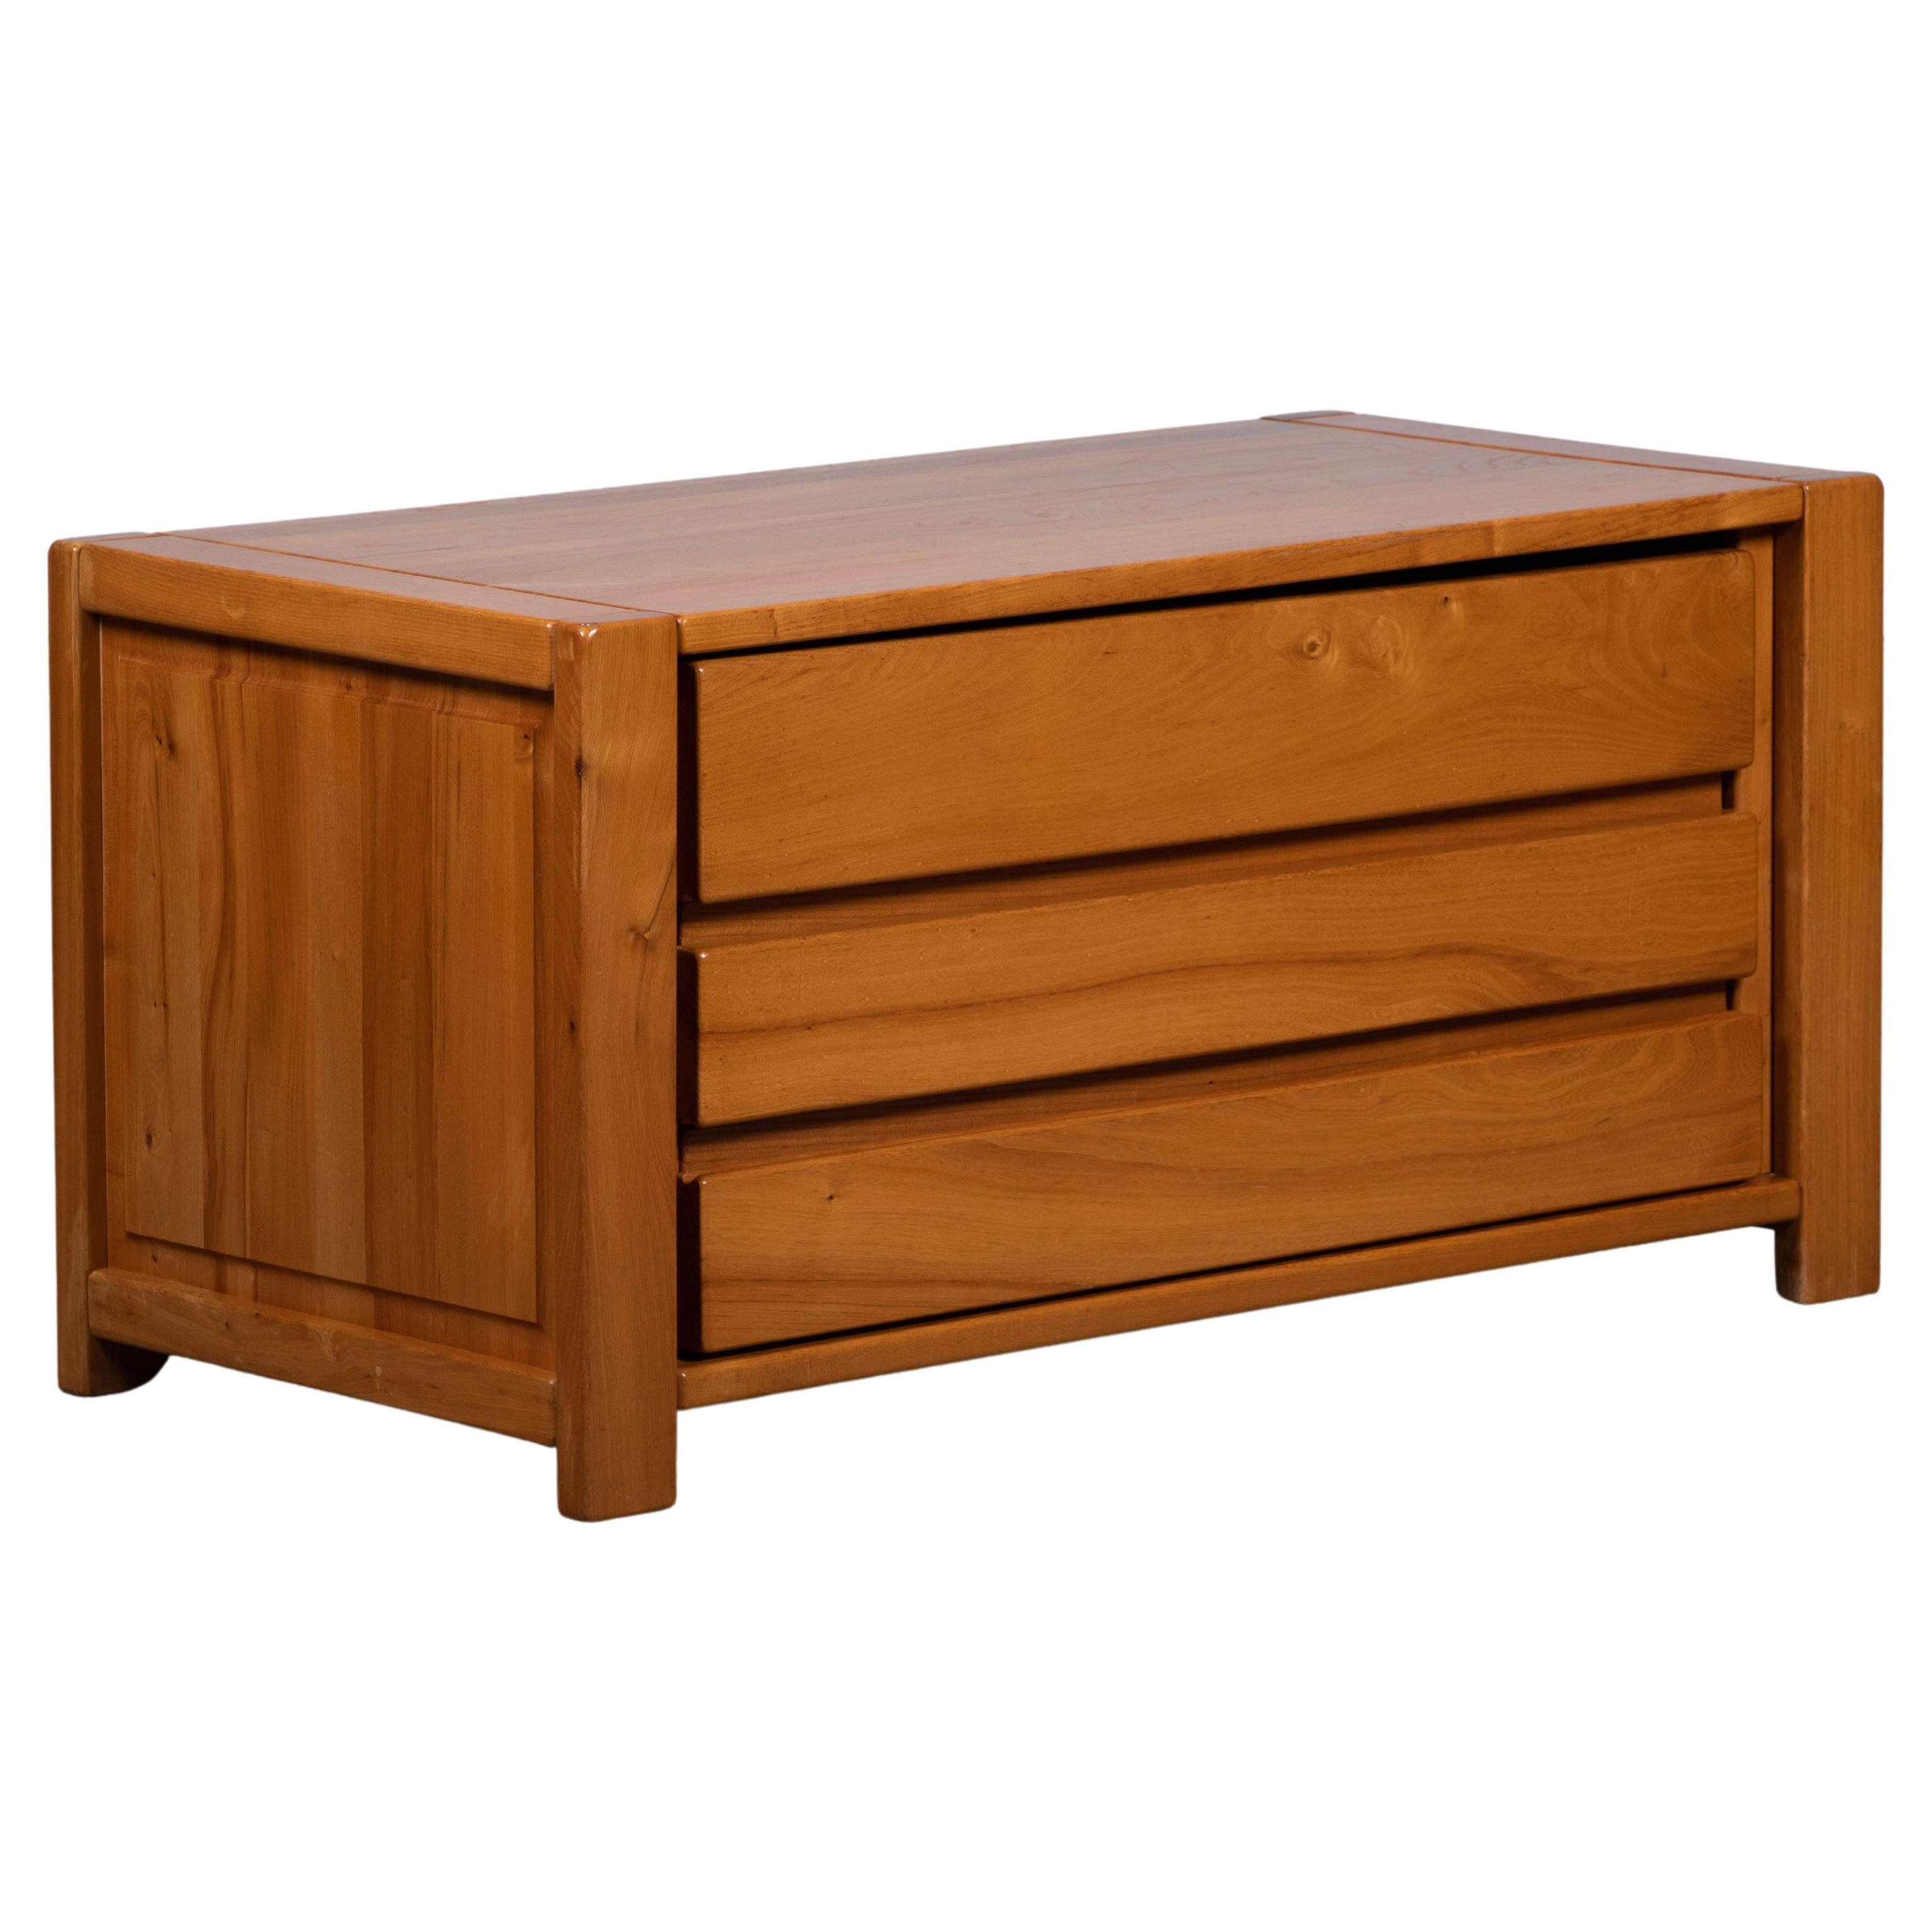 Chapo Insp Sideboard in Solid Elm, France, 1970s